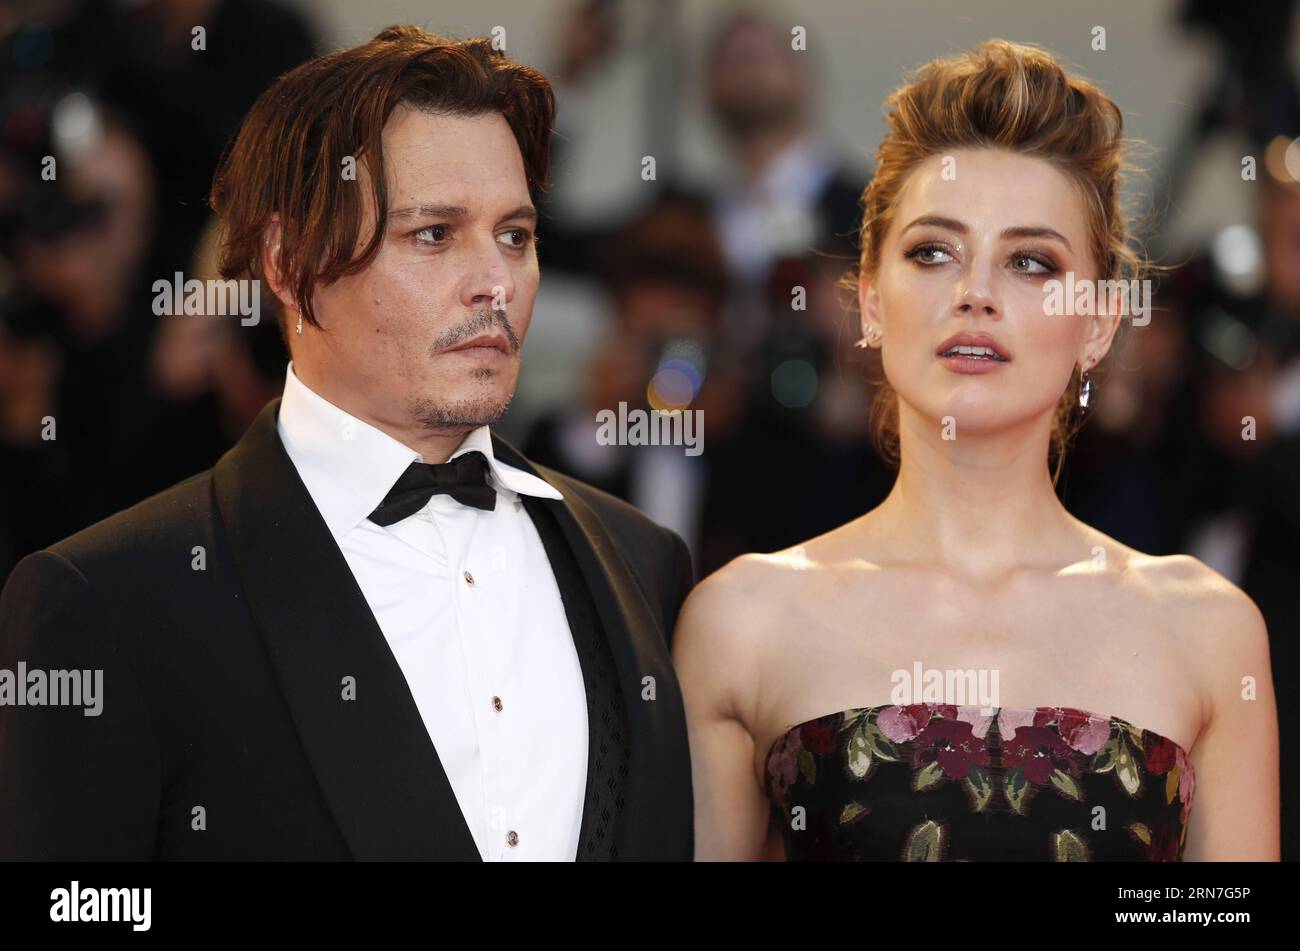 ENTERTAINMENT RED CARPET 72. Filmfest Venedig: Filmpremiere The Danish Girl 150905 -- VENICE, Sept. 5, 2015 -- Johnny Depp L and Amber Heard attend a premiere for The Danish Girl during the 72nd Venice Film Festival at Lido island in Venice, Italy, Sept. 5, 2015.  ITALY-VENICE-FILM-FESTIVAL-72ND-THE DANISH GIRL-PREMIERE YexPingfan PUBLICATIONxNOTxINxCHN Stock Photo